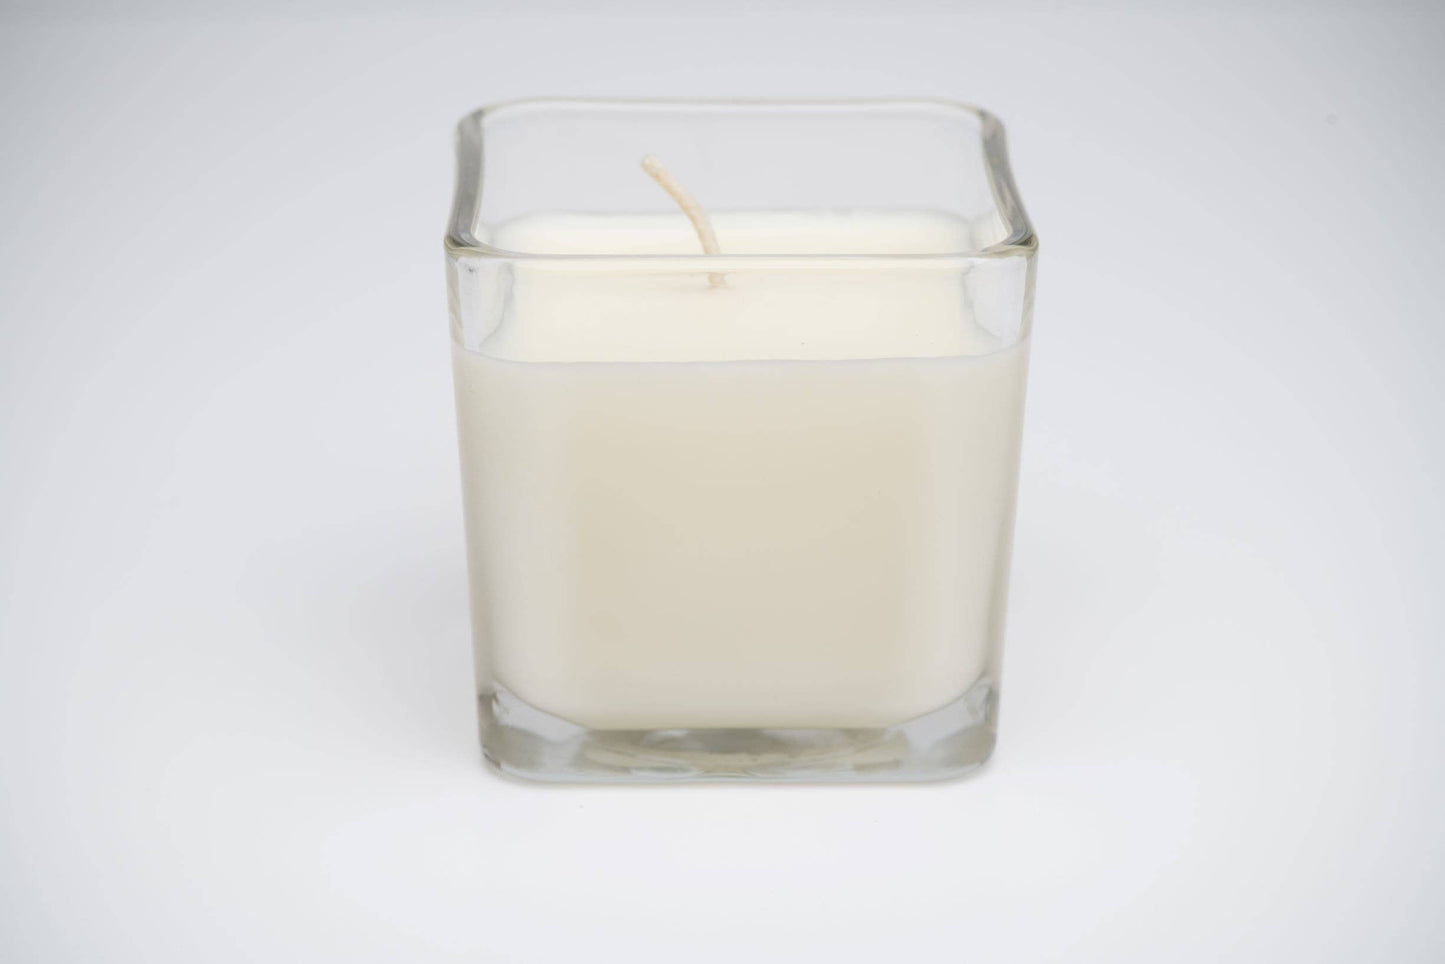 Creative Energy Candles - Citrus Basil & Wild Mint: 2-in-1 Soy Lotion Candle: Medium - 6 oz